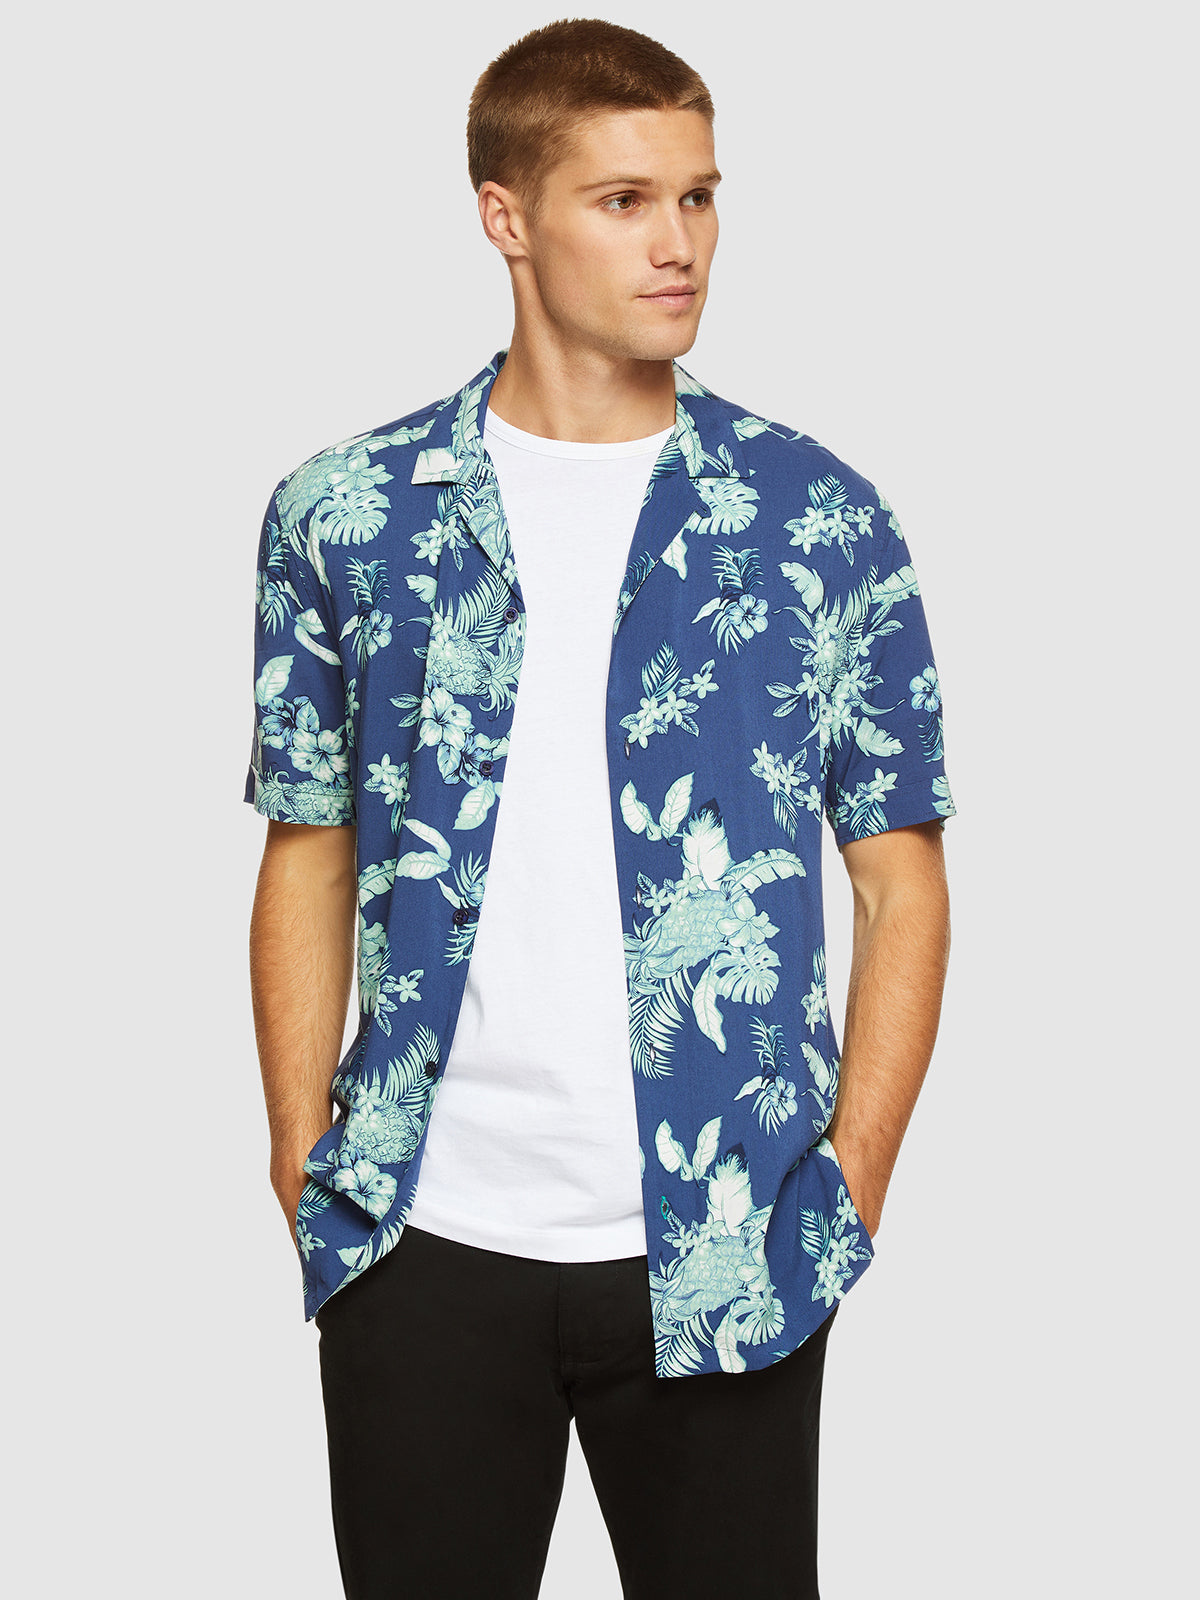 PUTNEY FLORAL PRINTED S/S SHIRT GREEN/BLUE